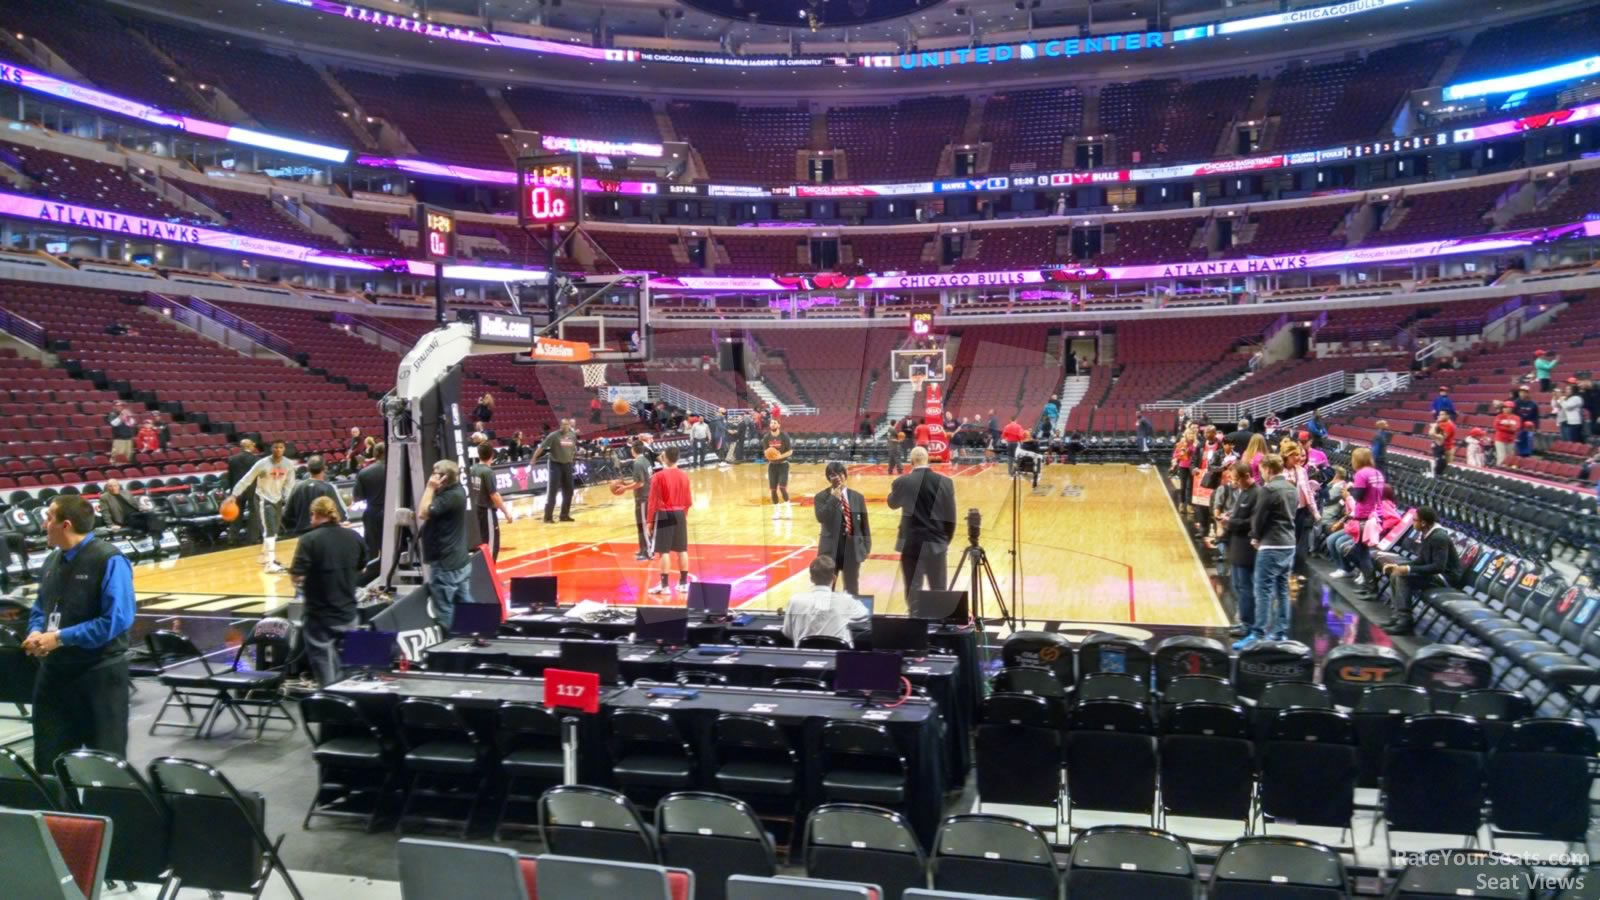 Chicago Bulls - United Center Section 116 - RateYourSeats.com